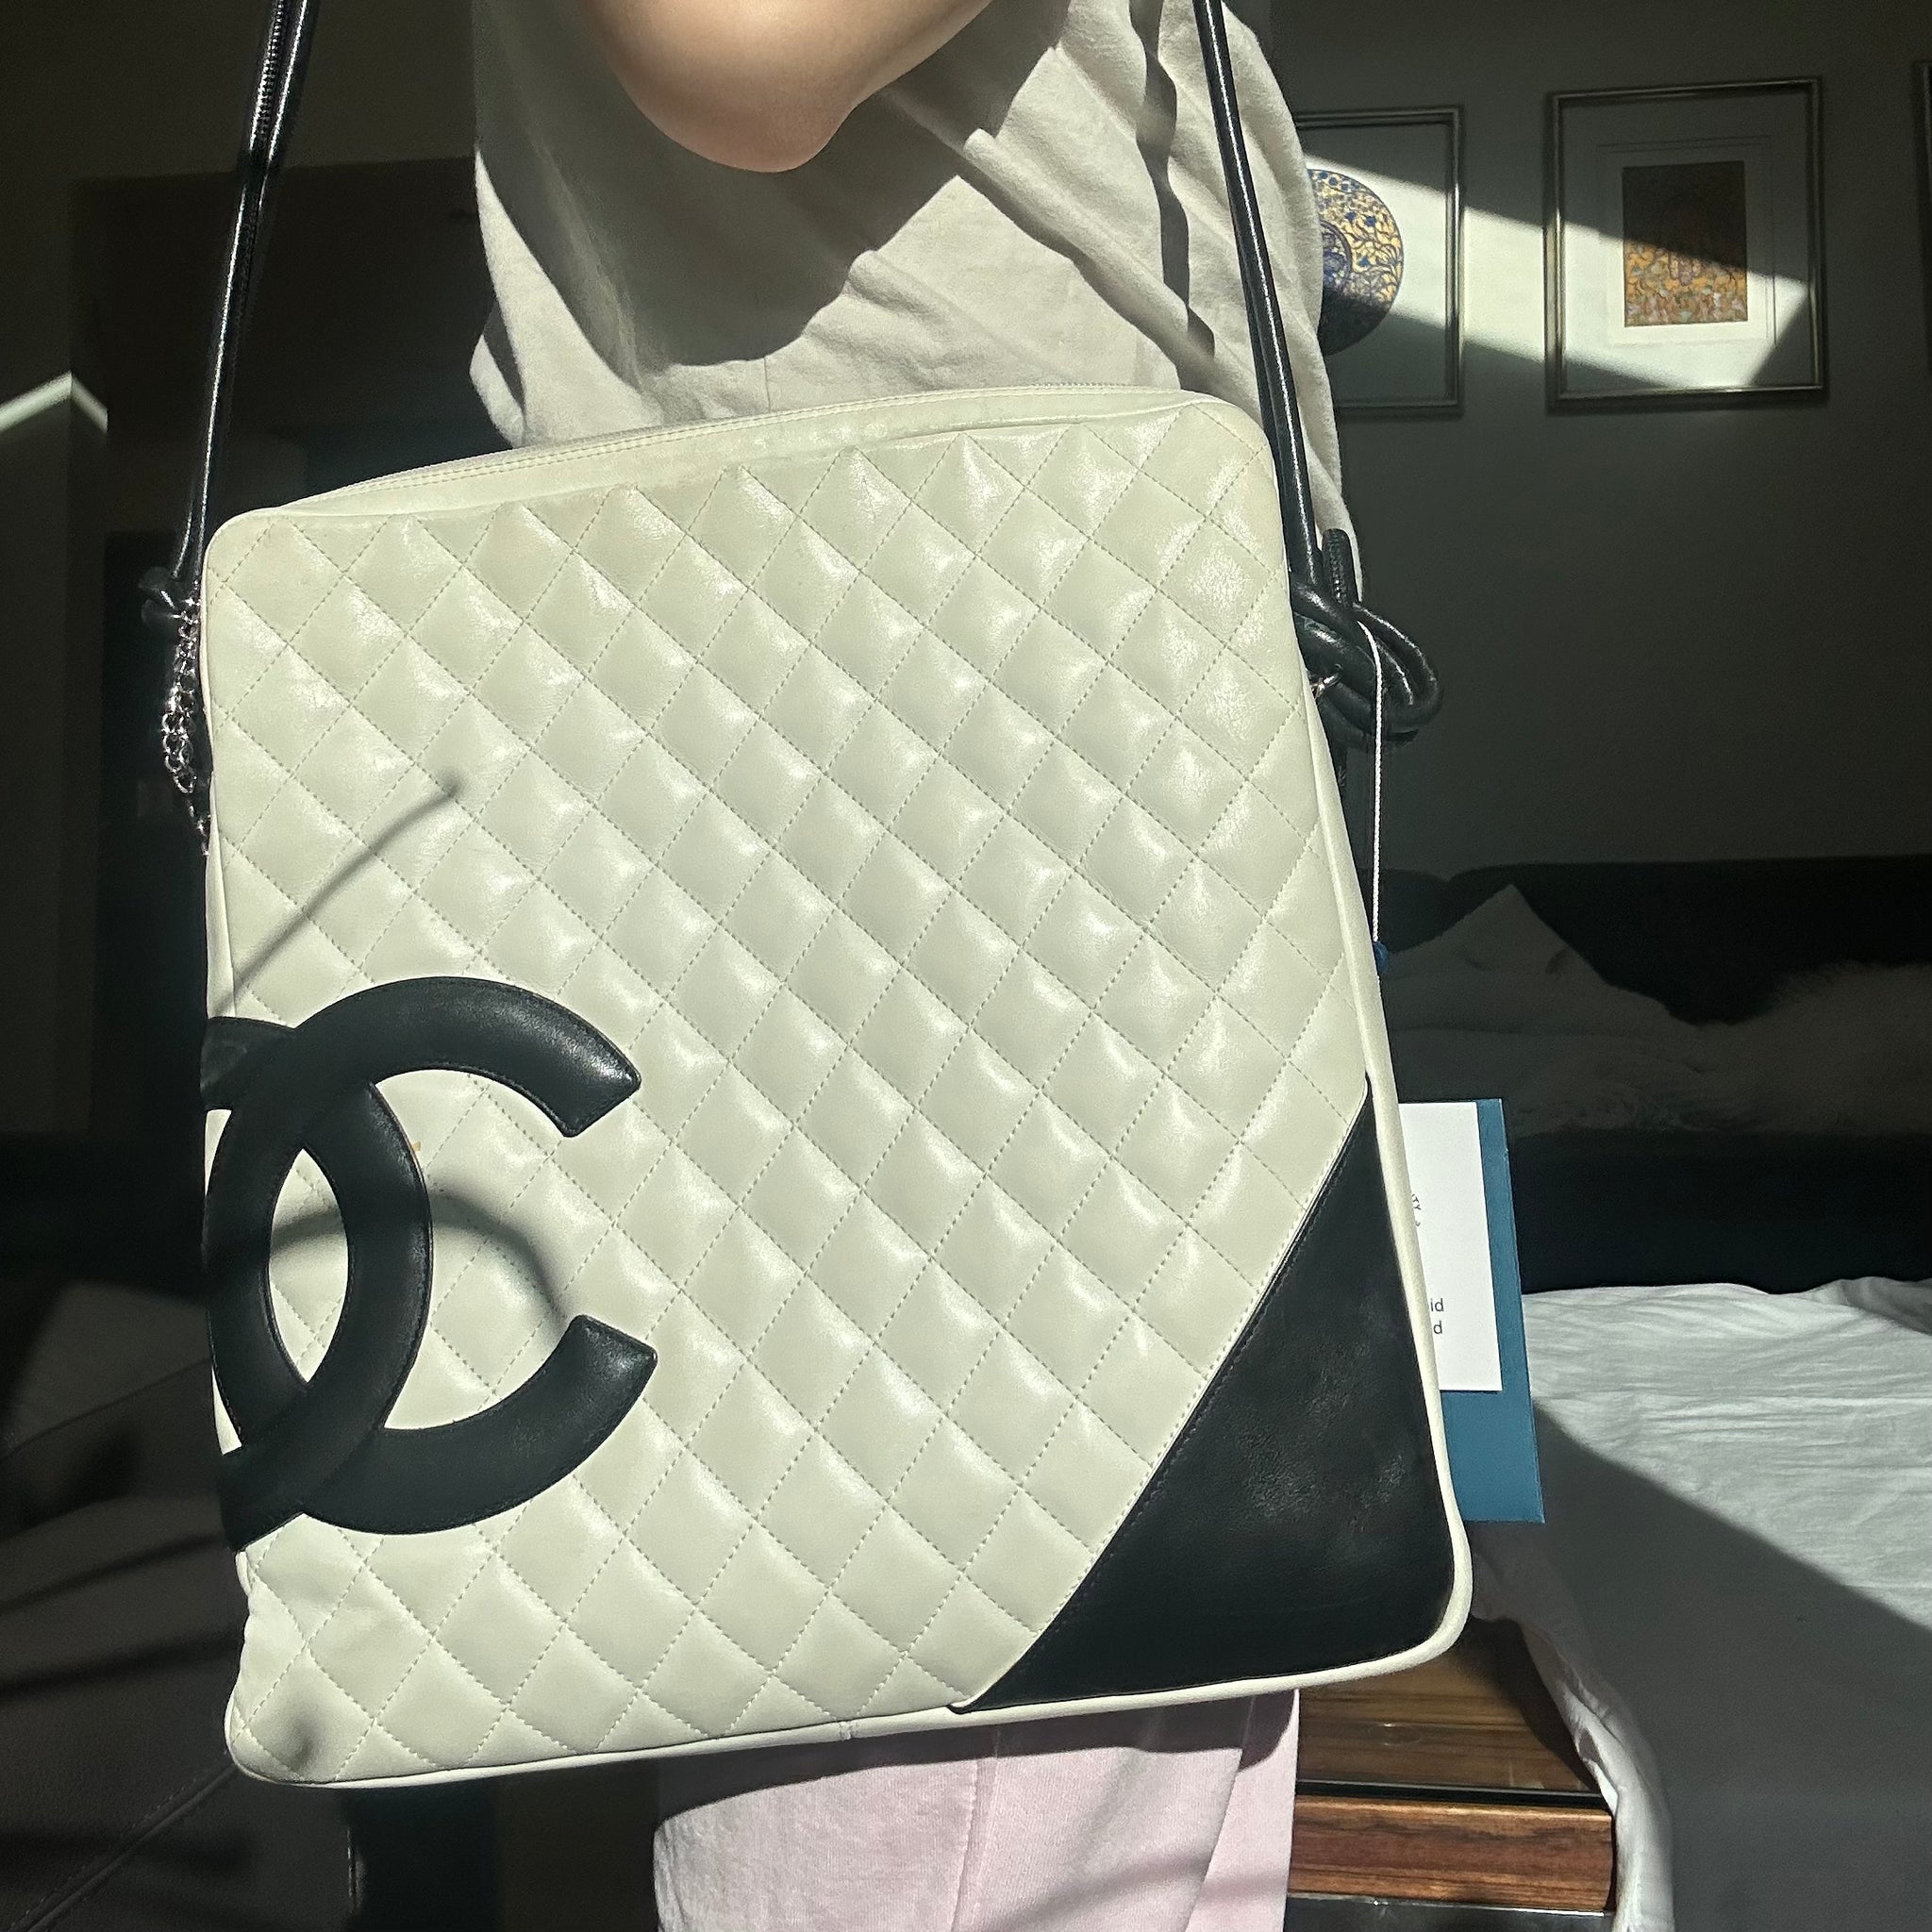 White Chanel Bags 